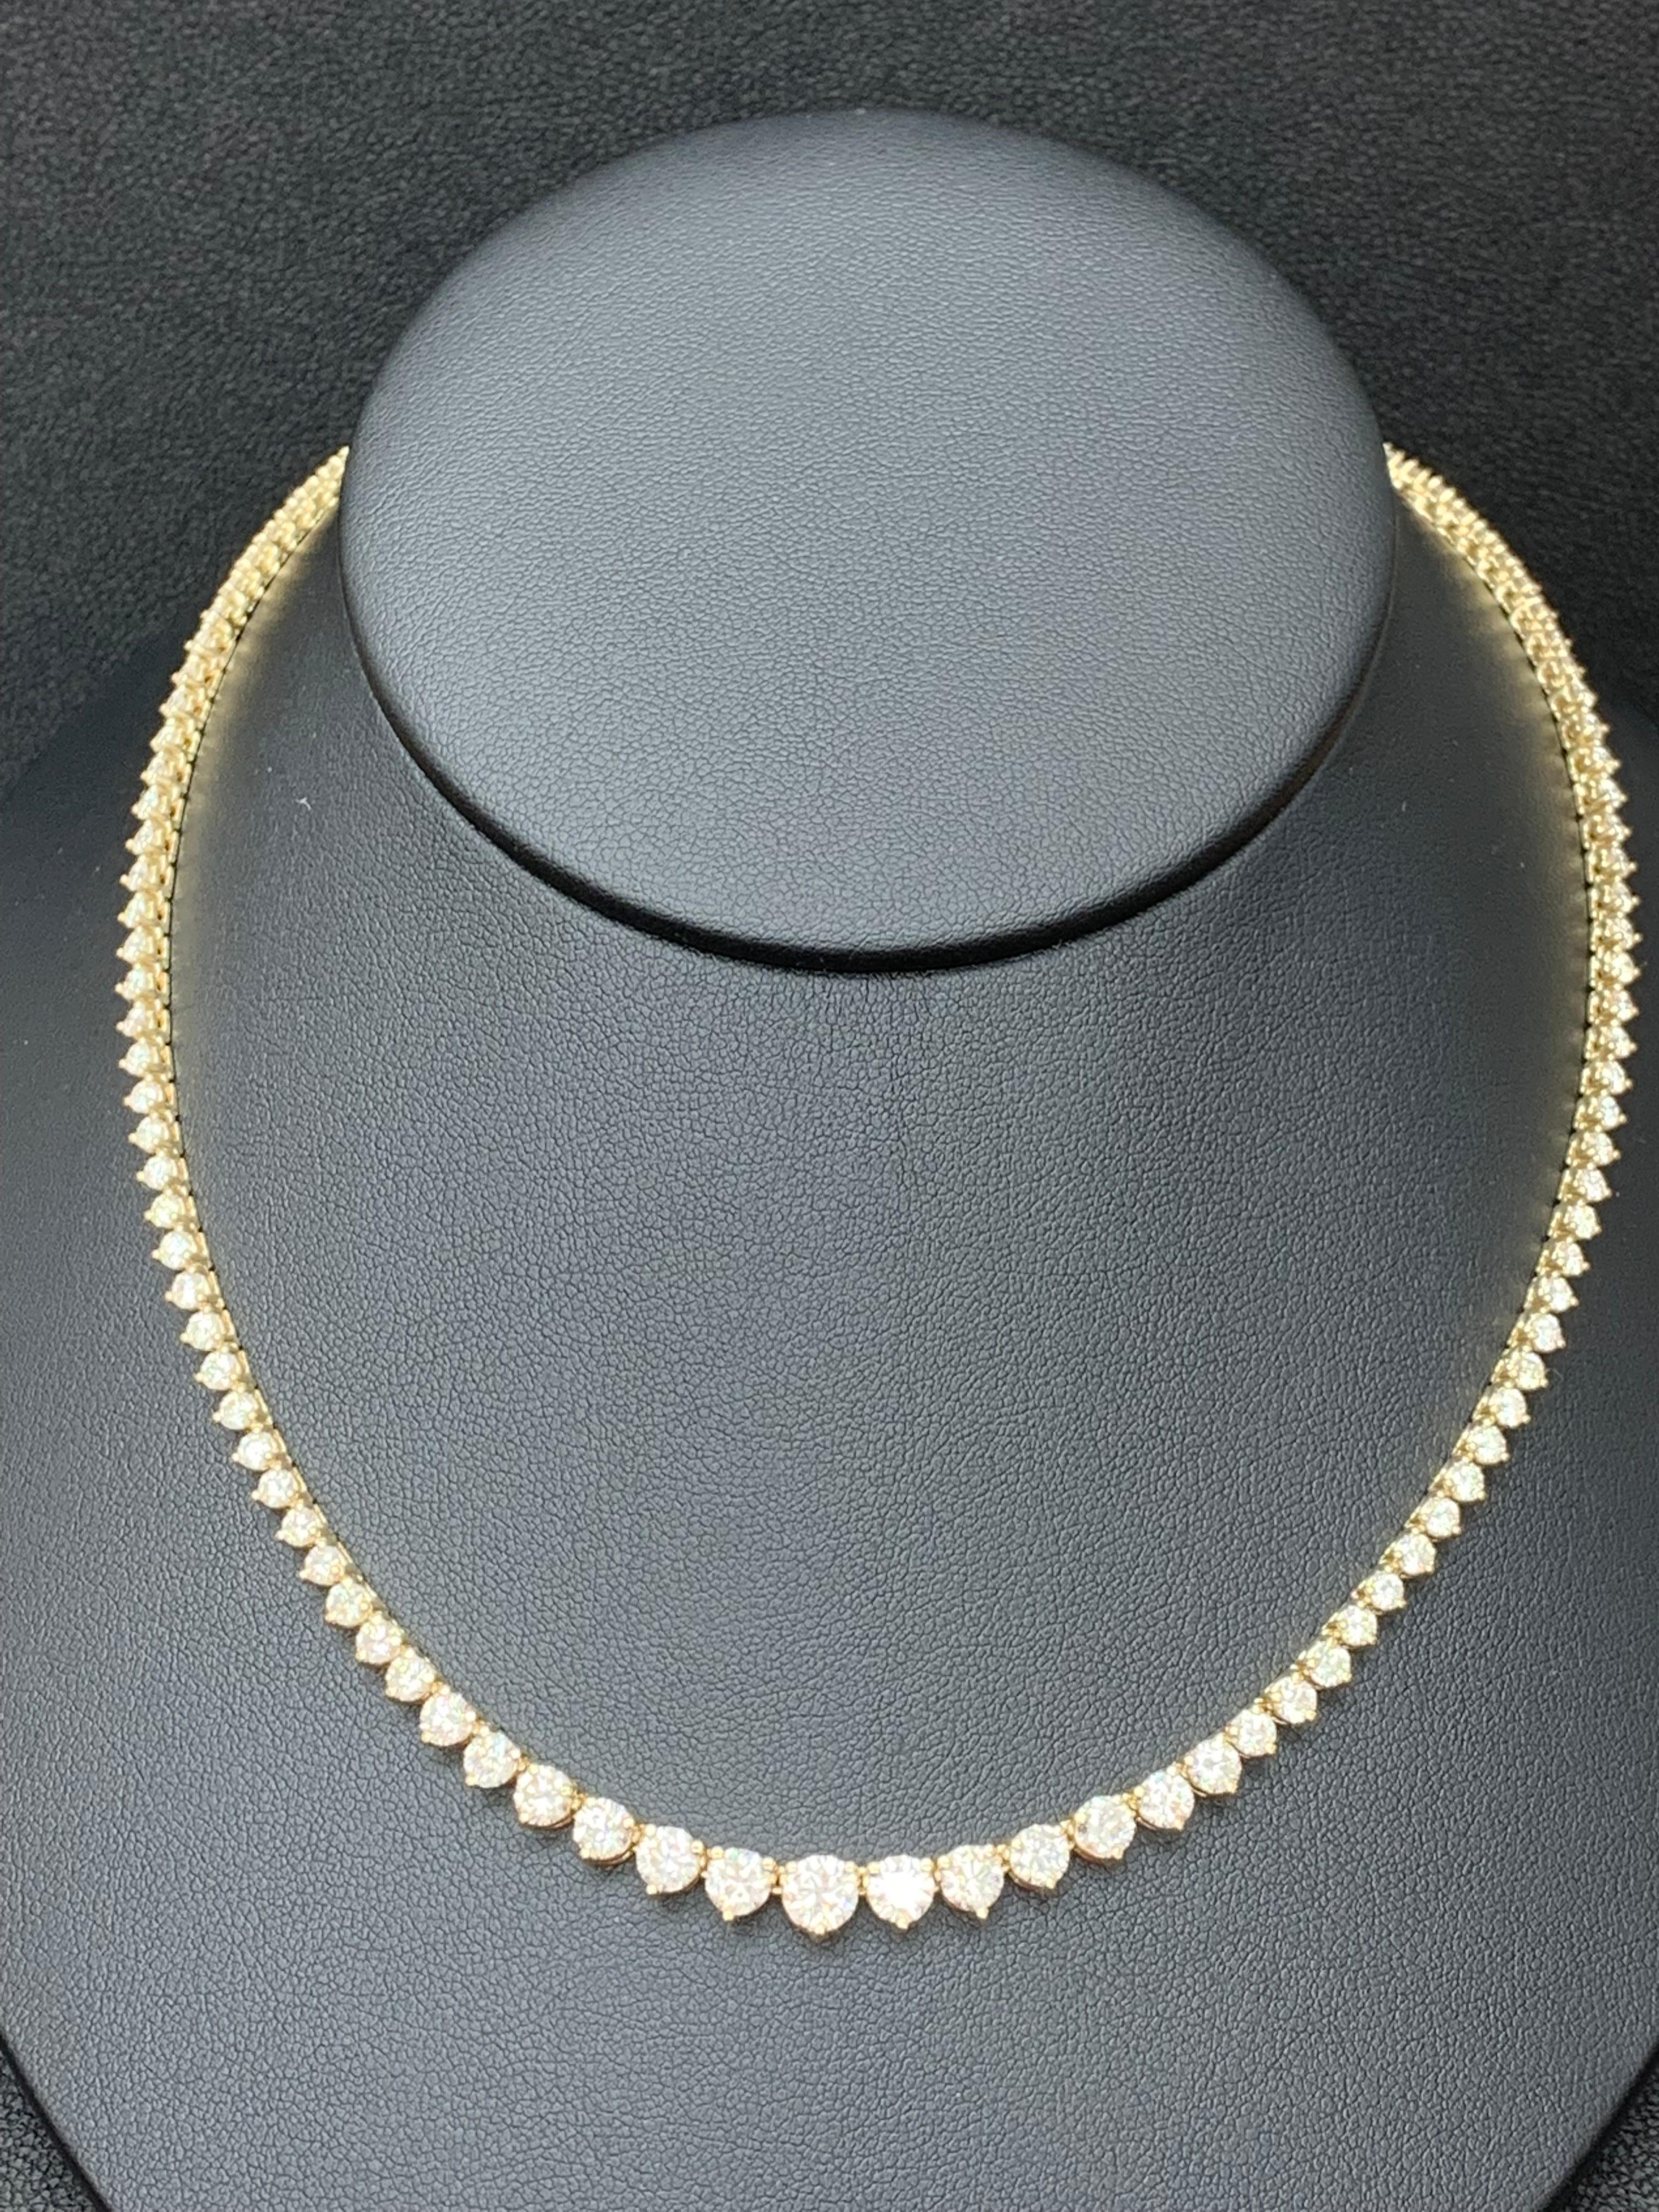 An important and brilliant necklace showcasing graduating round brilliant diamonds weighing 12.05 carats total, each set in a three-prong basket made in 14 karat yellow gold. Has an invisible double lock mechanism for a seamless, brilliant